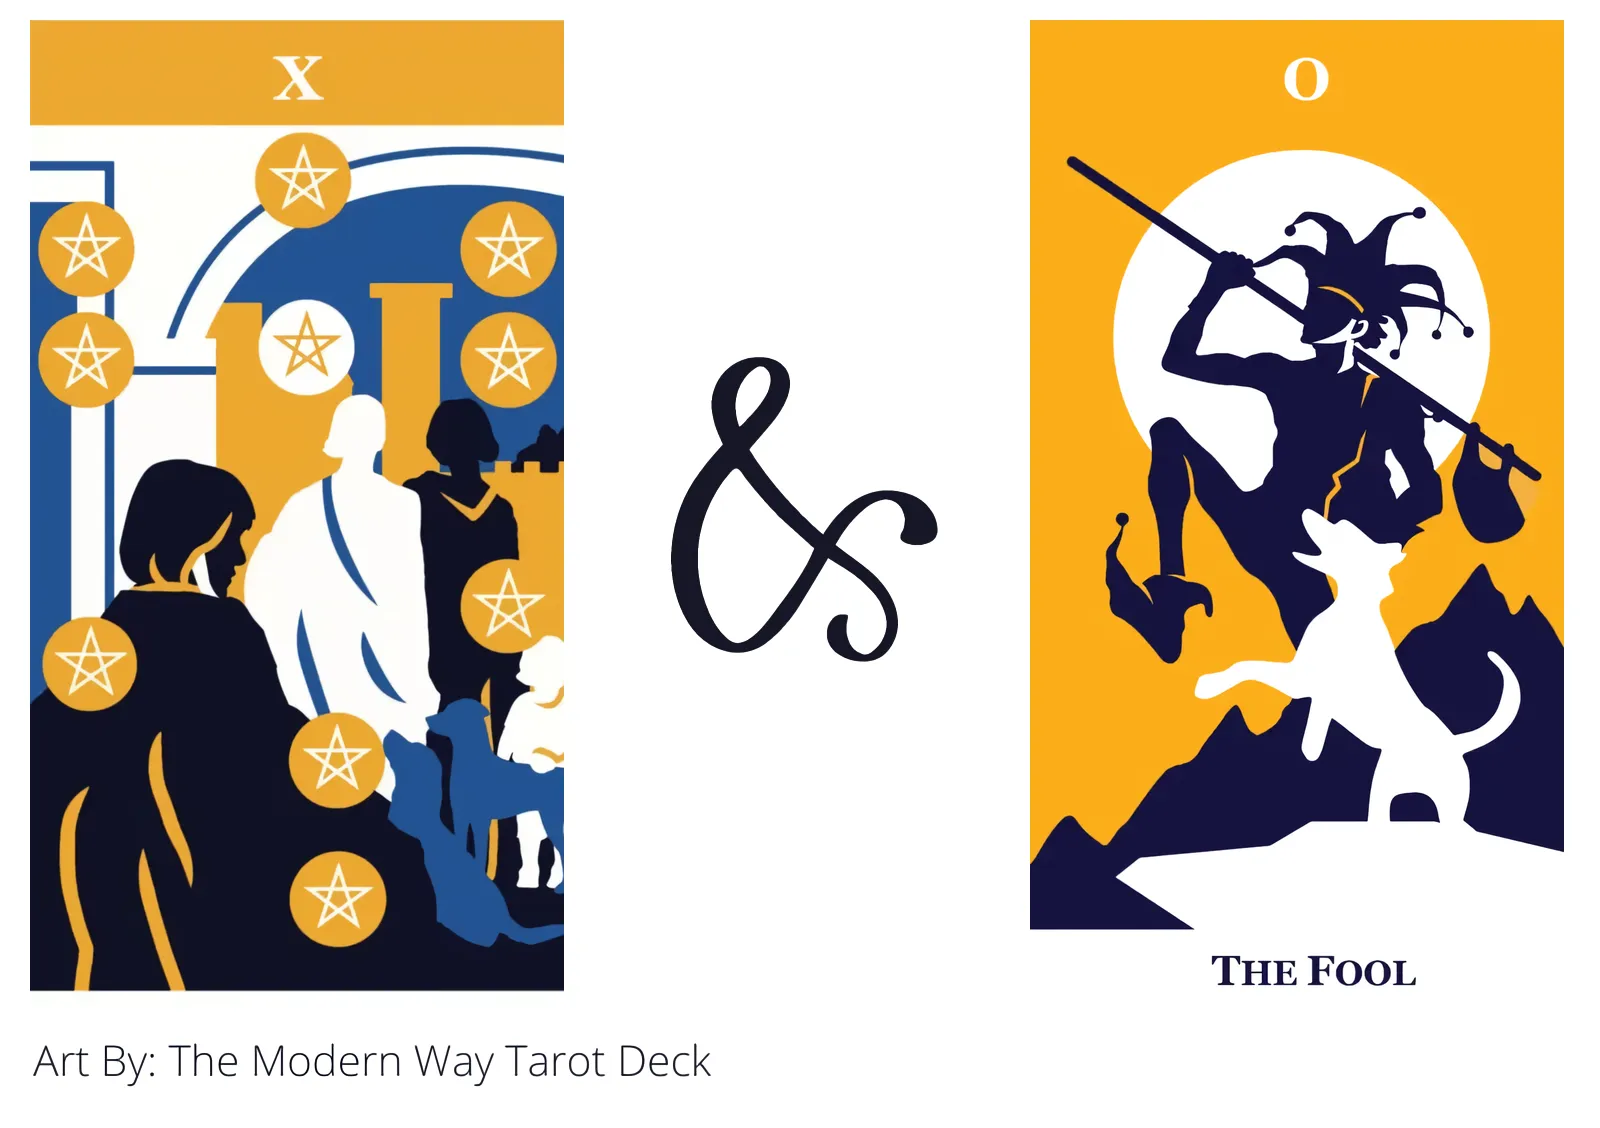 ten of pentacles and the fool tarot cards together